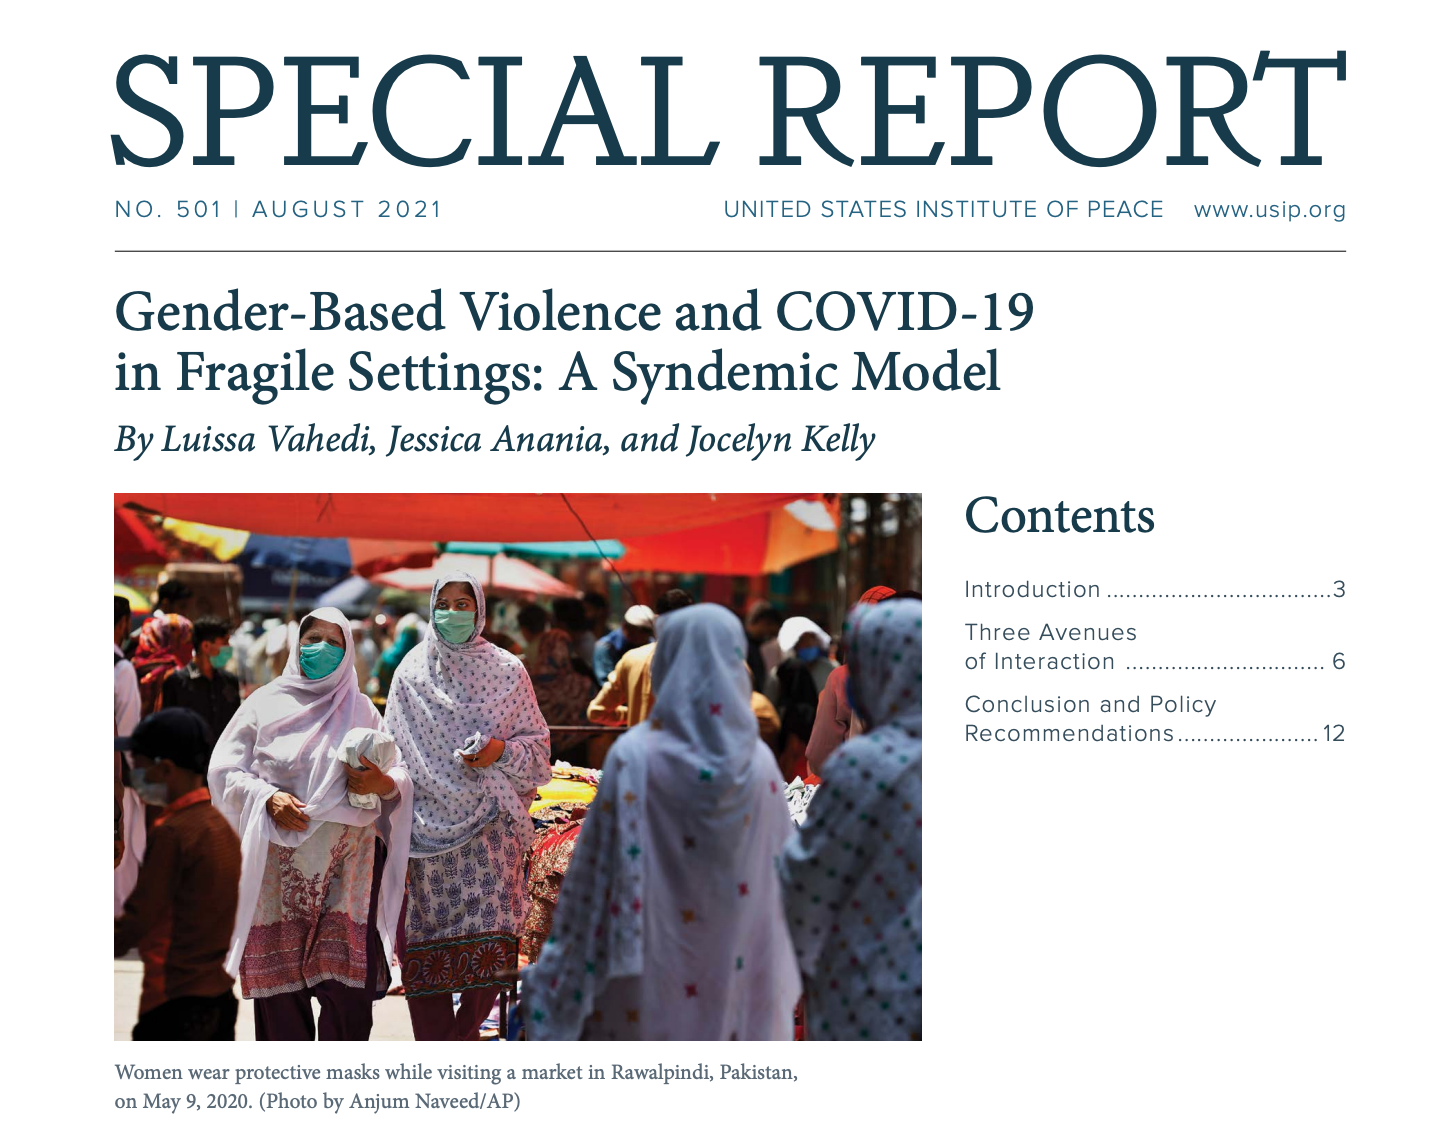 Gender-based violence and COVID-19 in fragile settings: A syndemic model